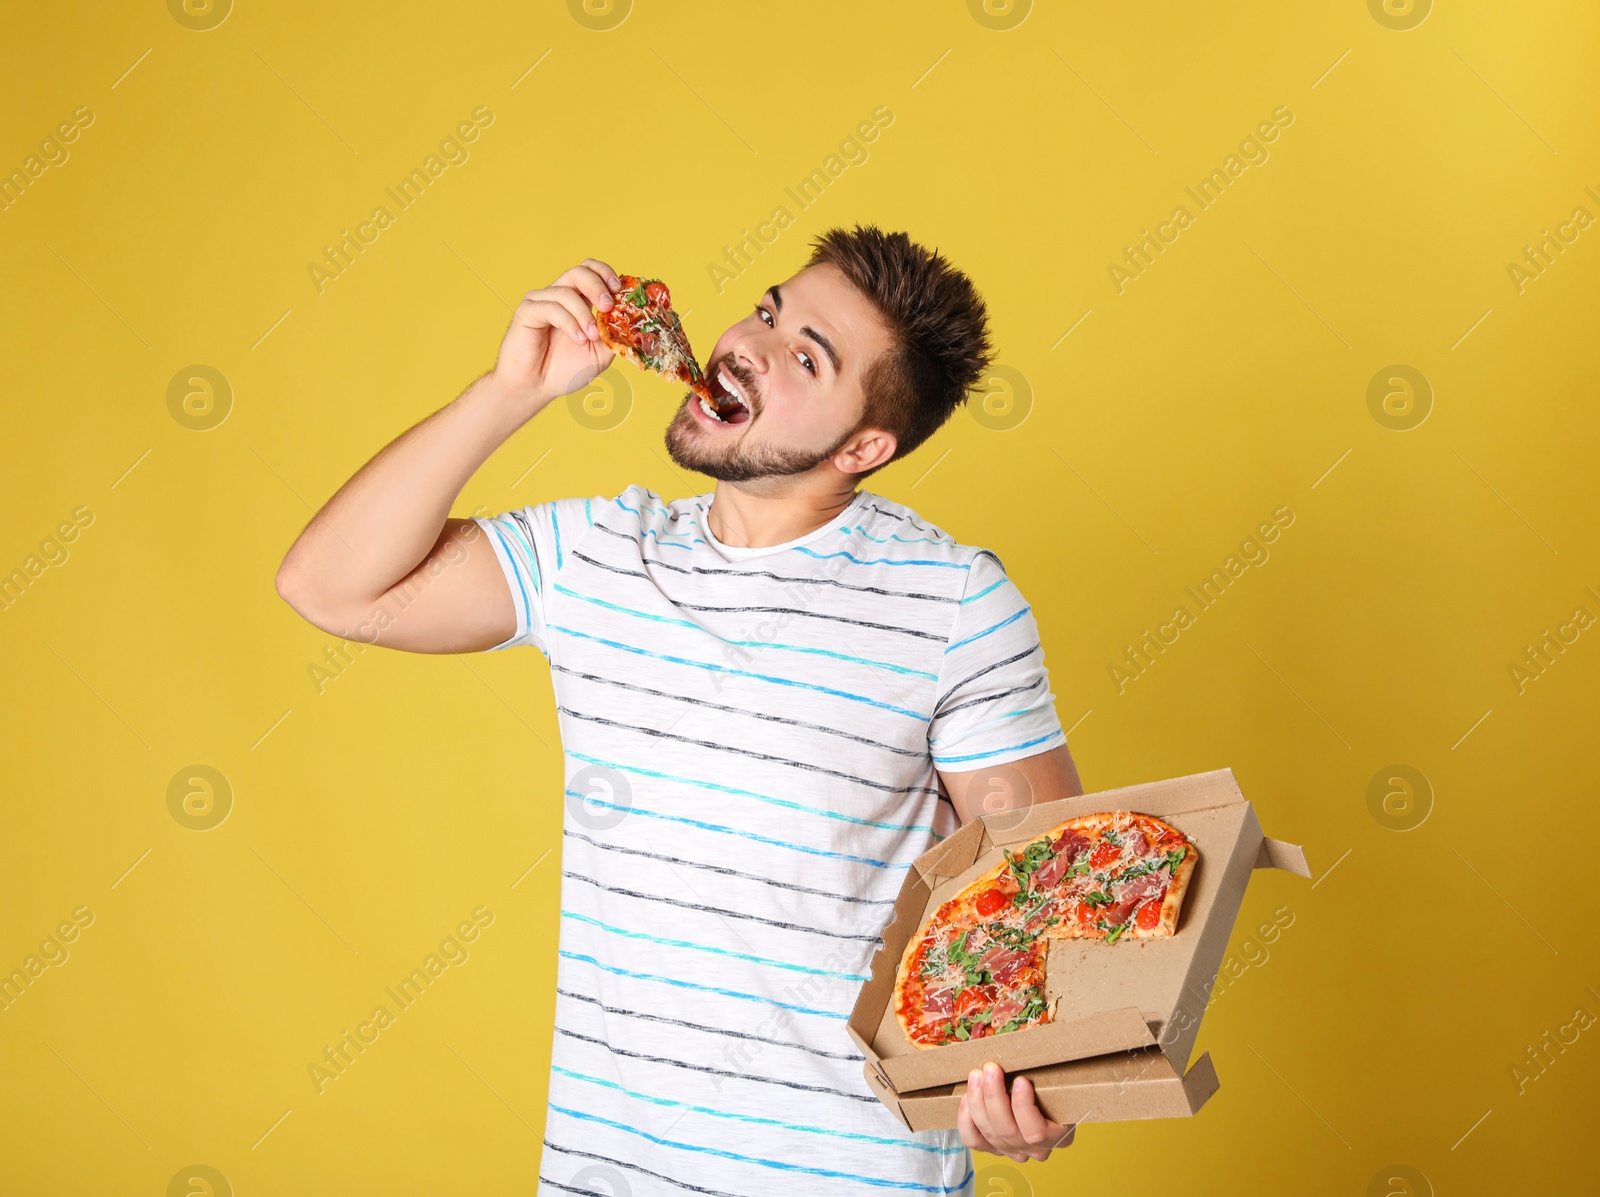 Photo of Handsome man eating tasty pizza on yellow background